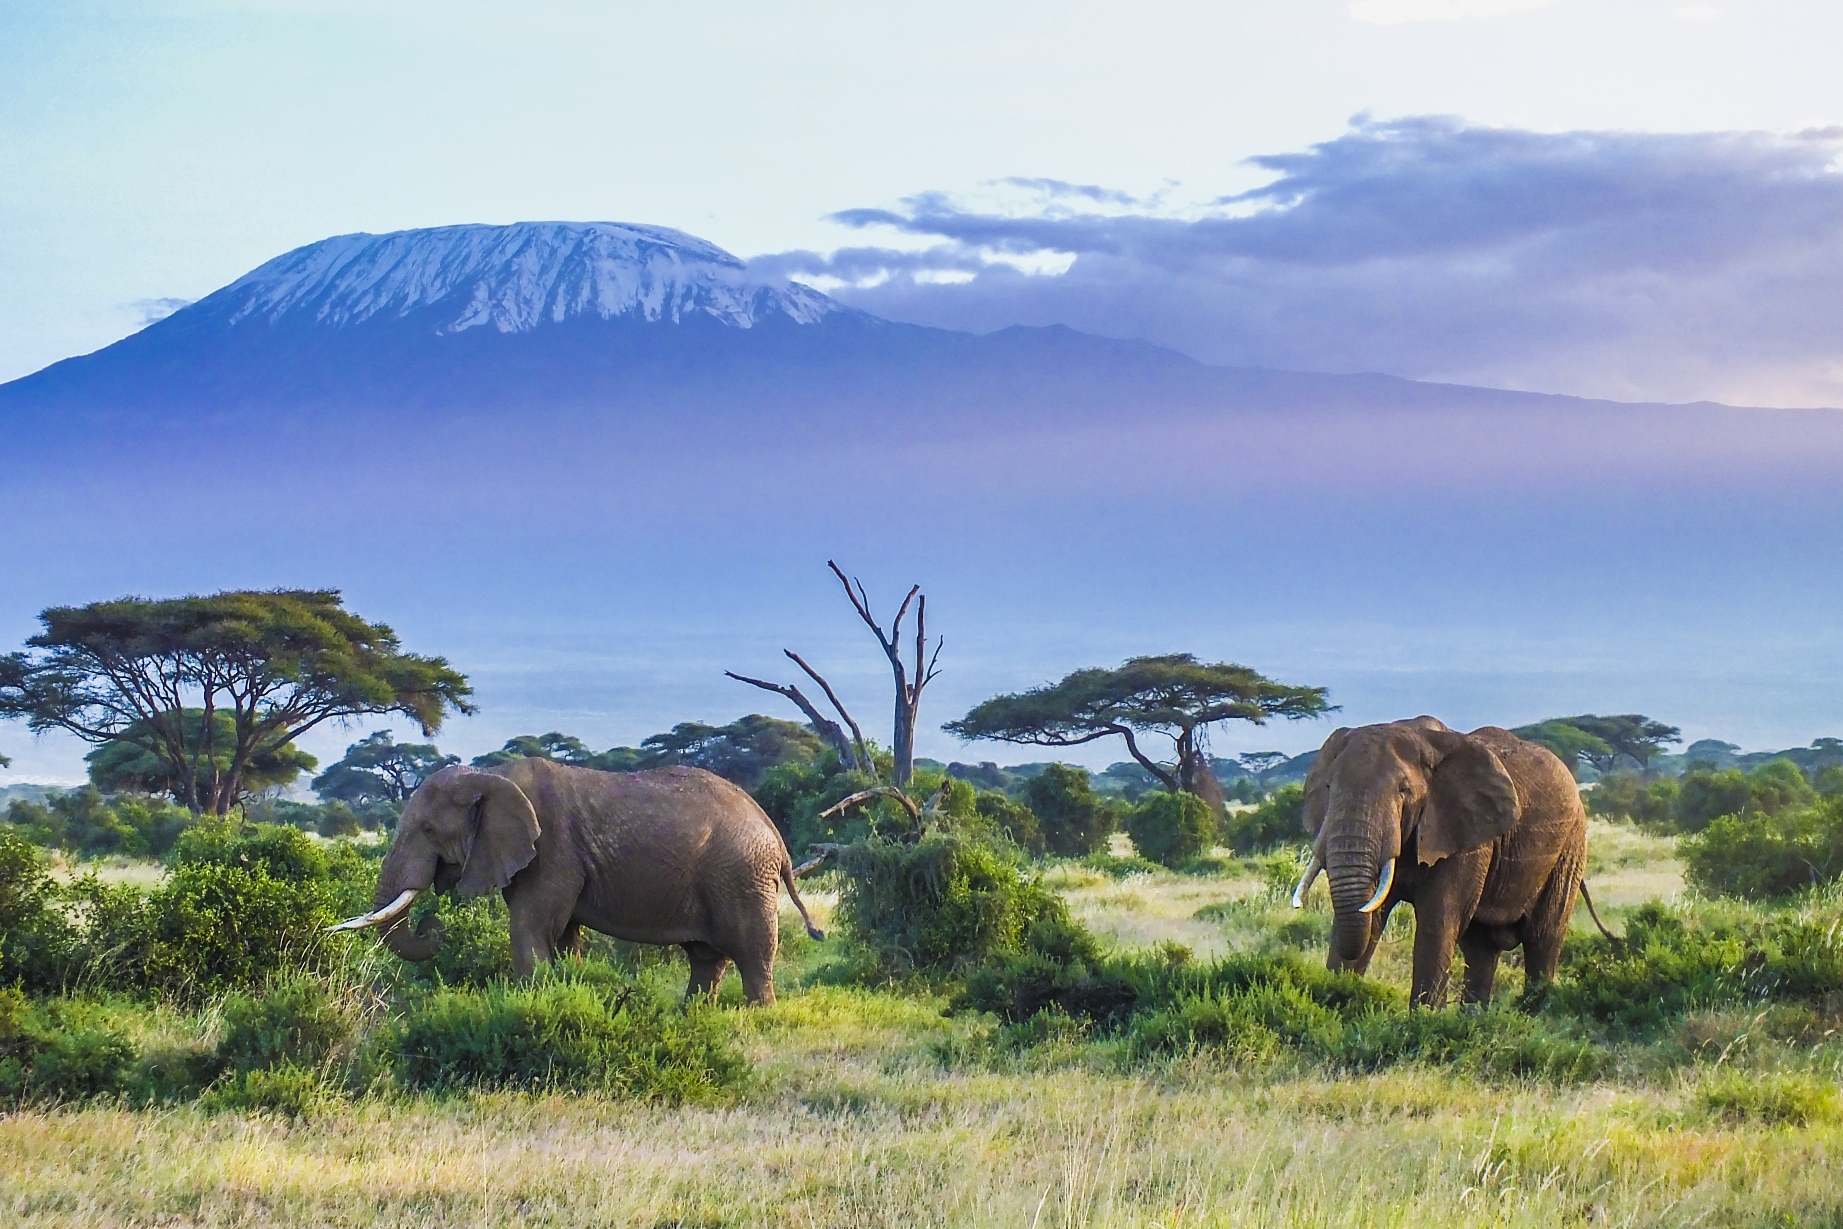 Elephants with Kilimanjaro in the background